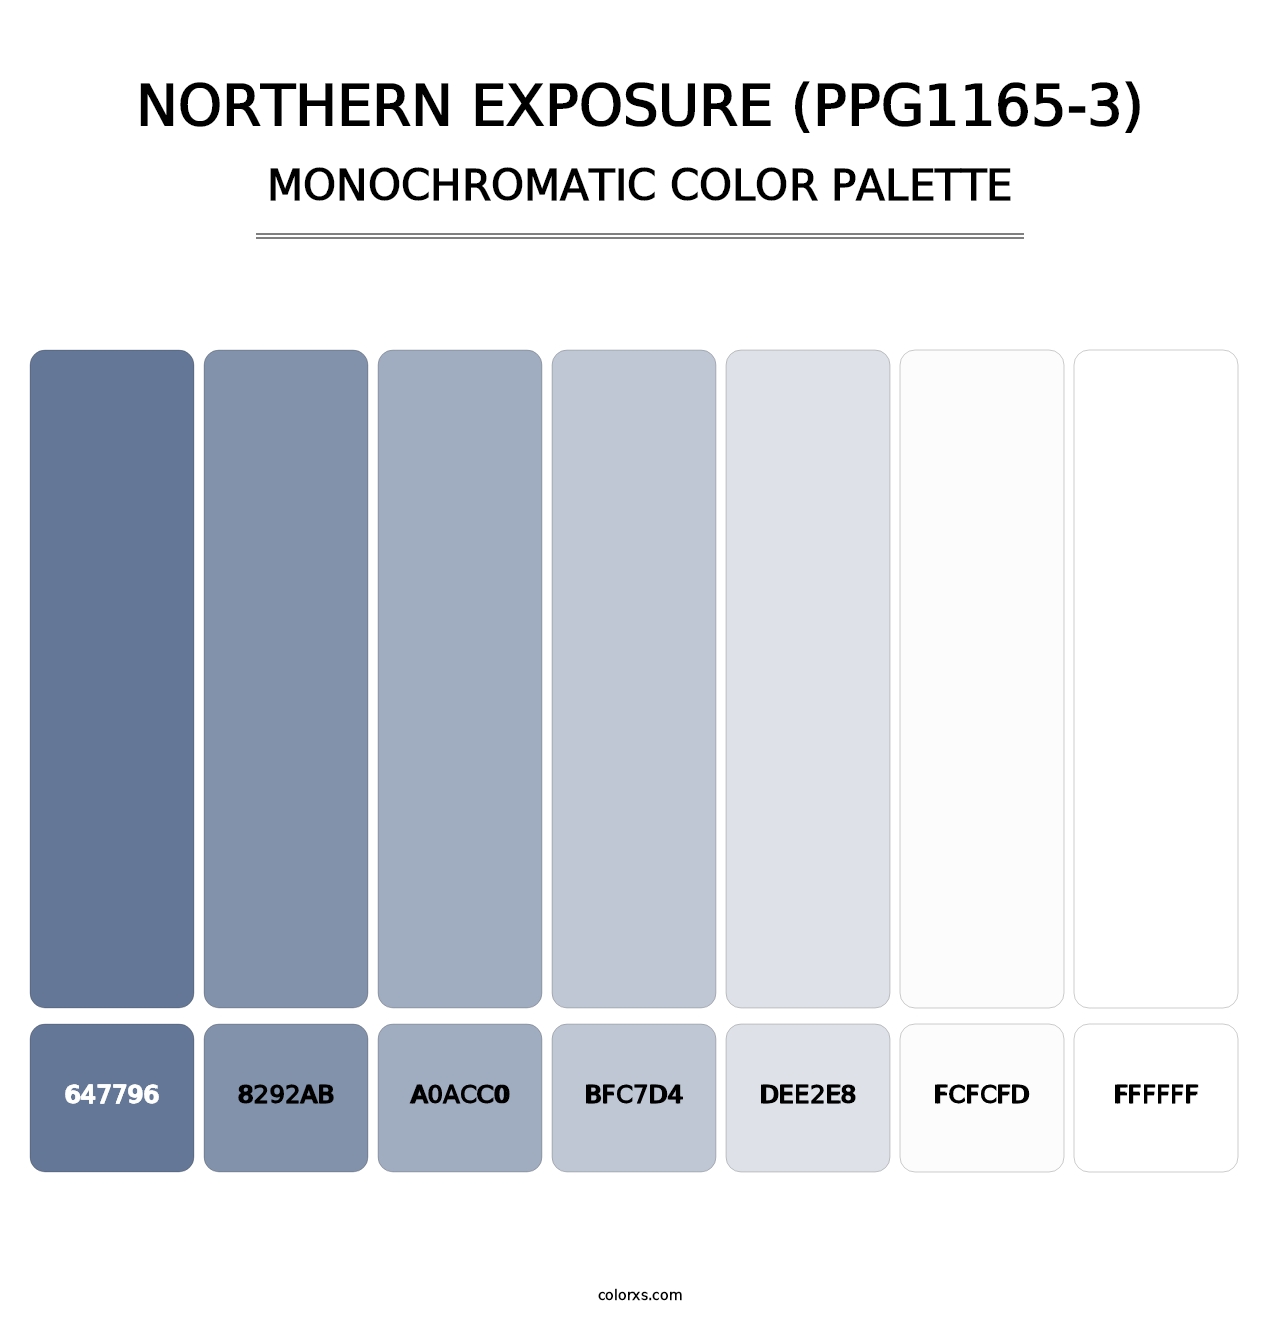 Northern Exposure (PPG1165-3) - Monochromatic Color Palette